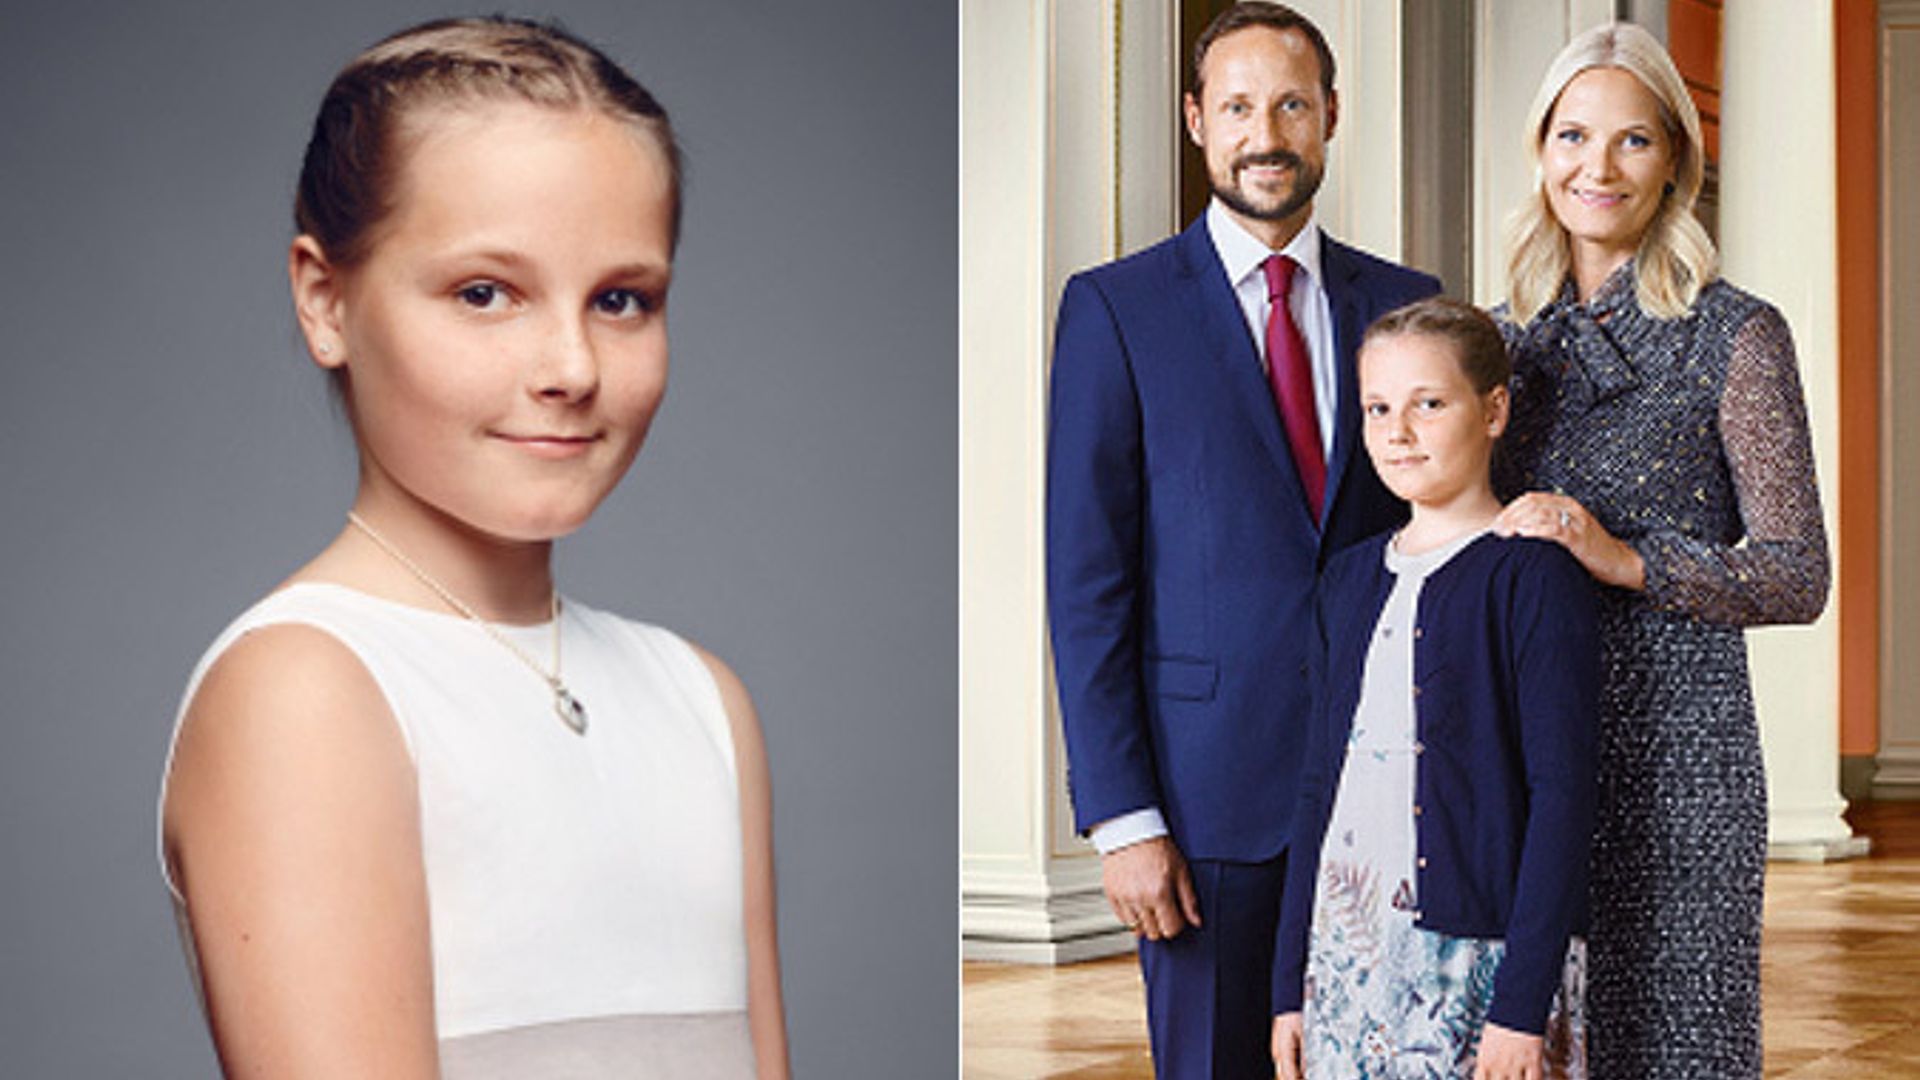 Princess Ingrid of Norway turns 12: See her new official portraits